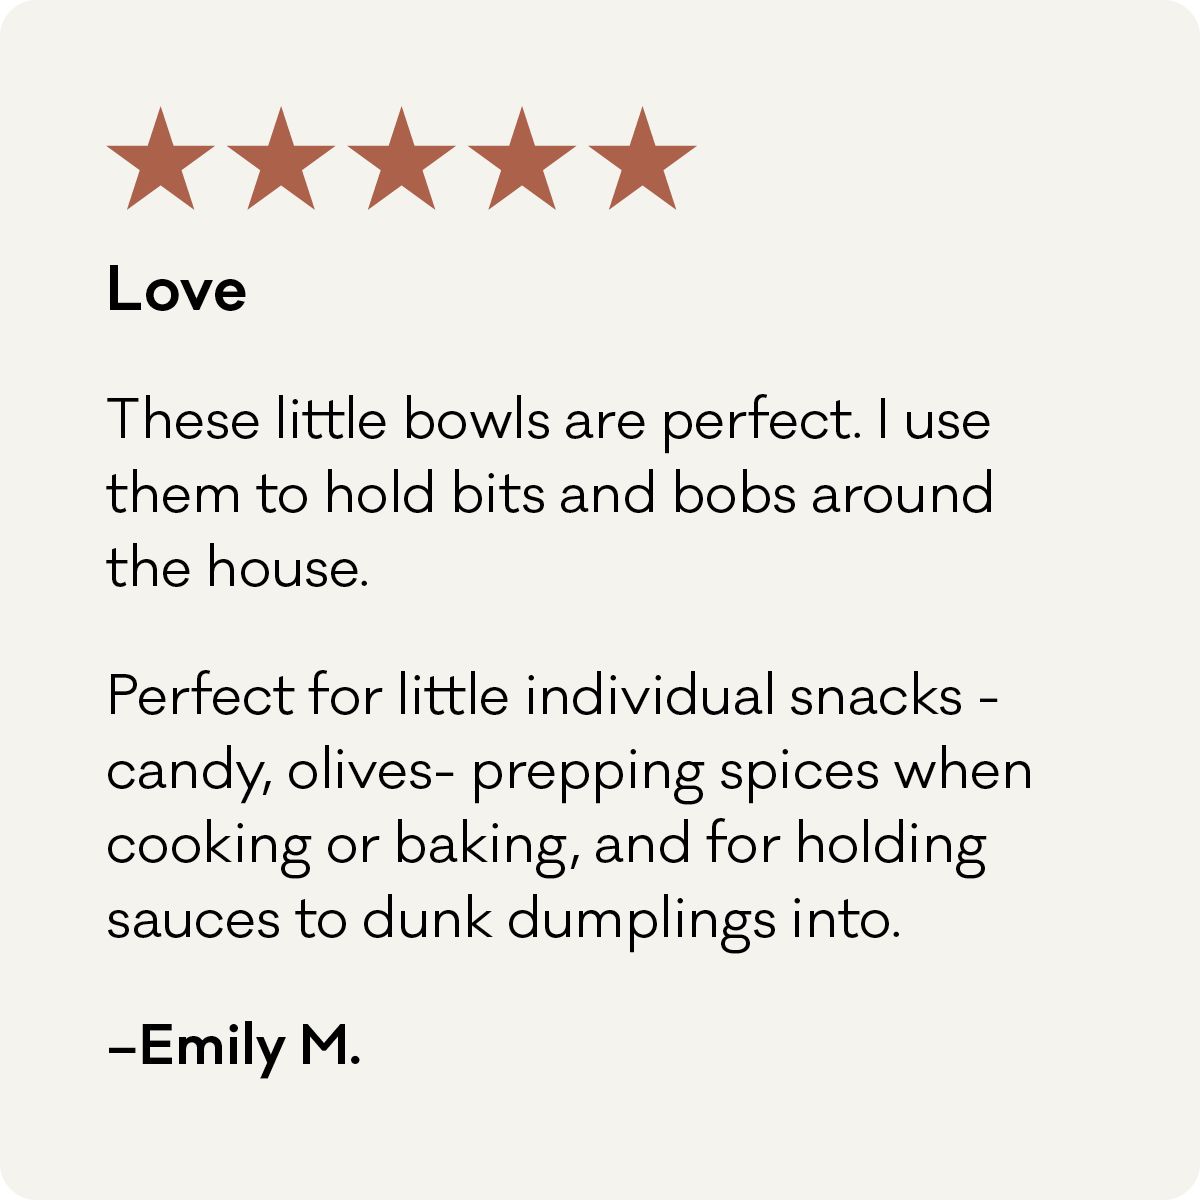 5 Stars, Love. These little bowls are perfect. I use them to hold bits and bobs around the house. Perfect for individual snacks - candy, olives - prepping spices when cooking or baking, and or holding sauce to dunk dumplings into. - Emily M